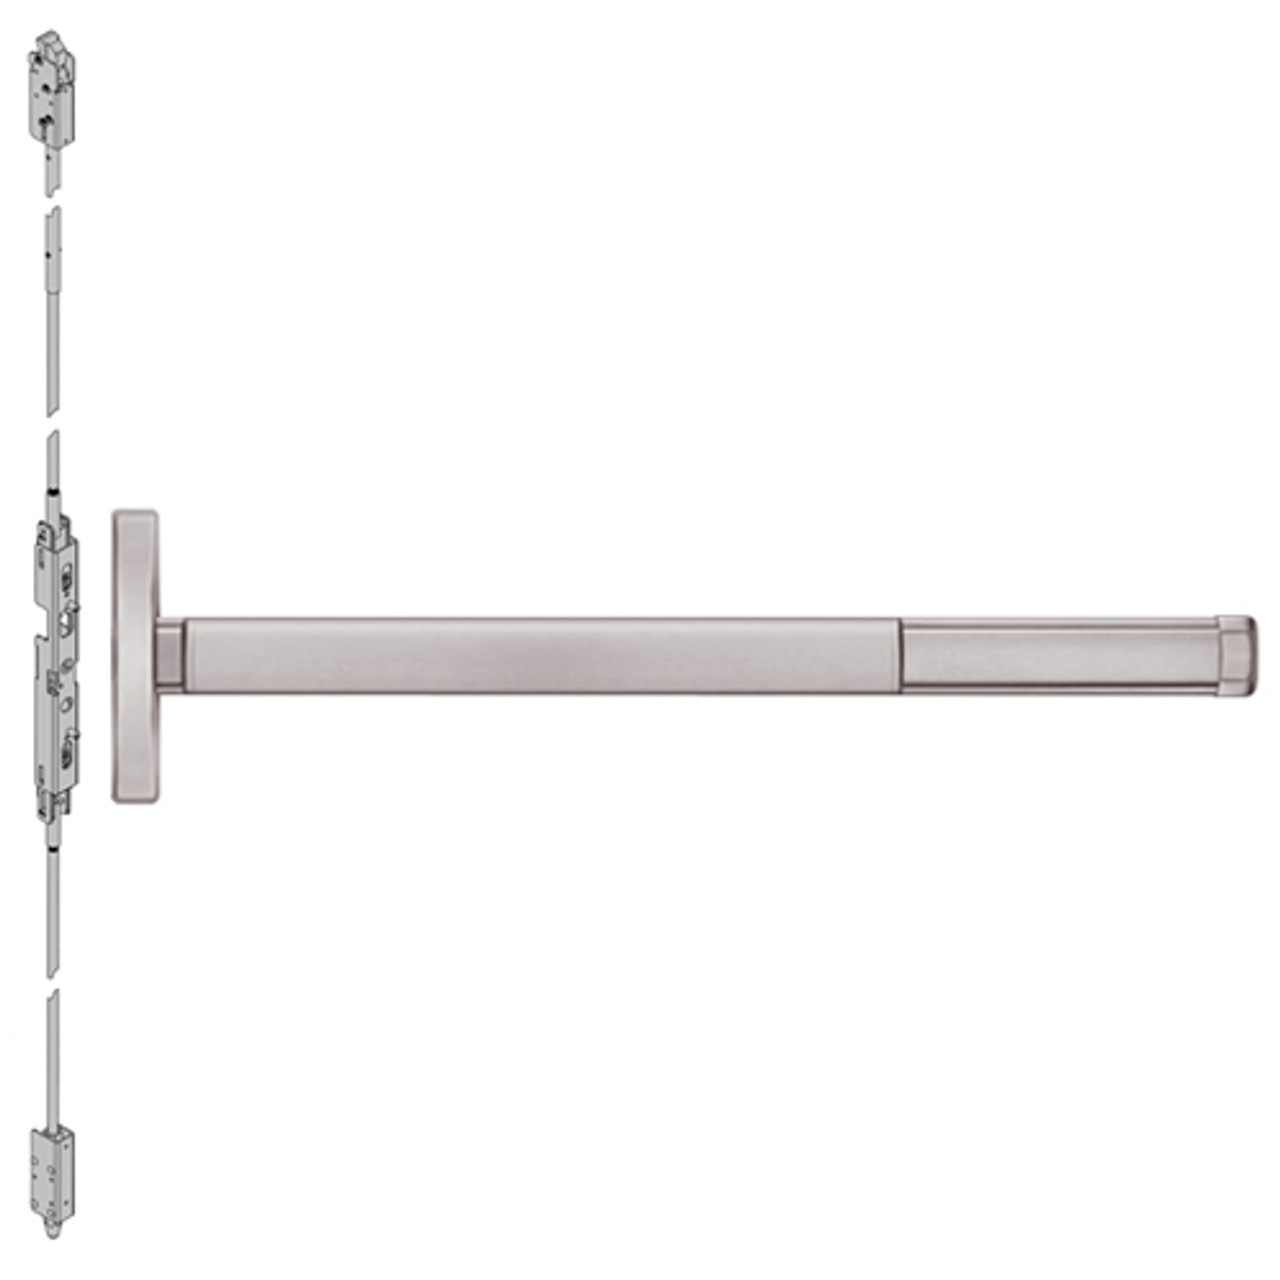 2608LBRCD-628-48 PHI 2600 Series Non Fire Rated Concealed Vertical Rod Exit Device Prepped for Key Controls Lever with Cylinder Dogging and LBR in Satin Aluminum Finish